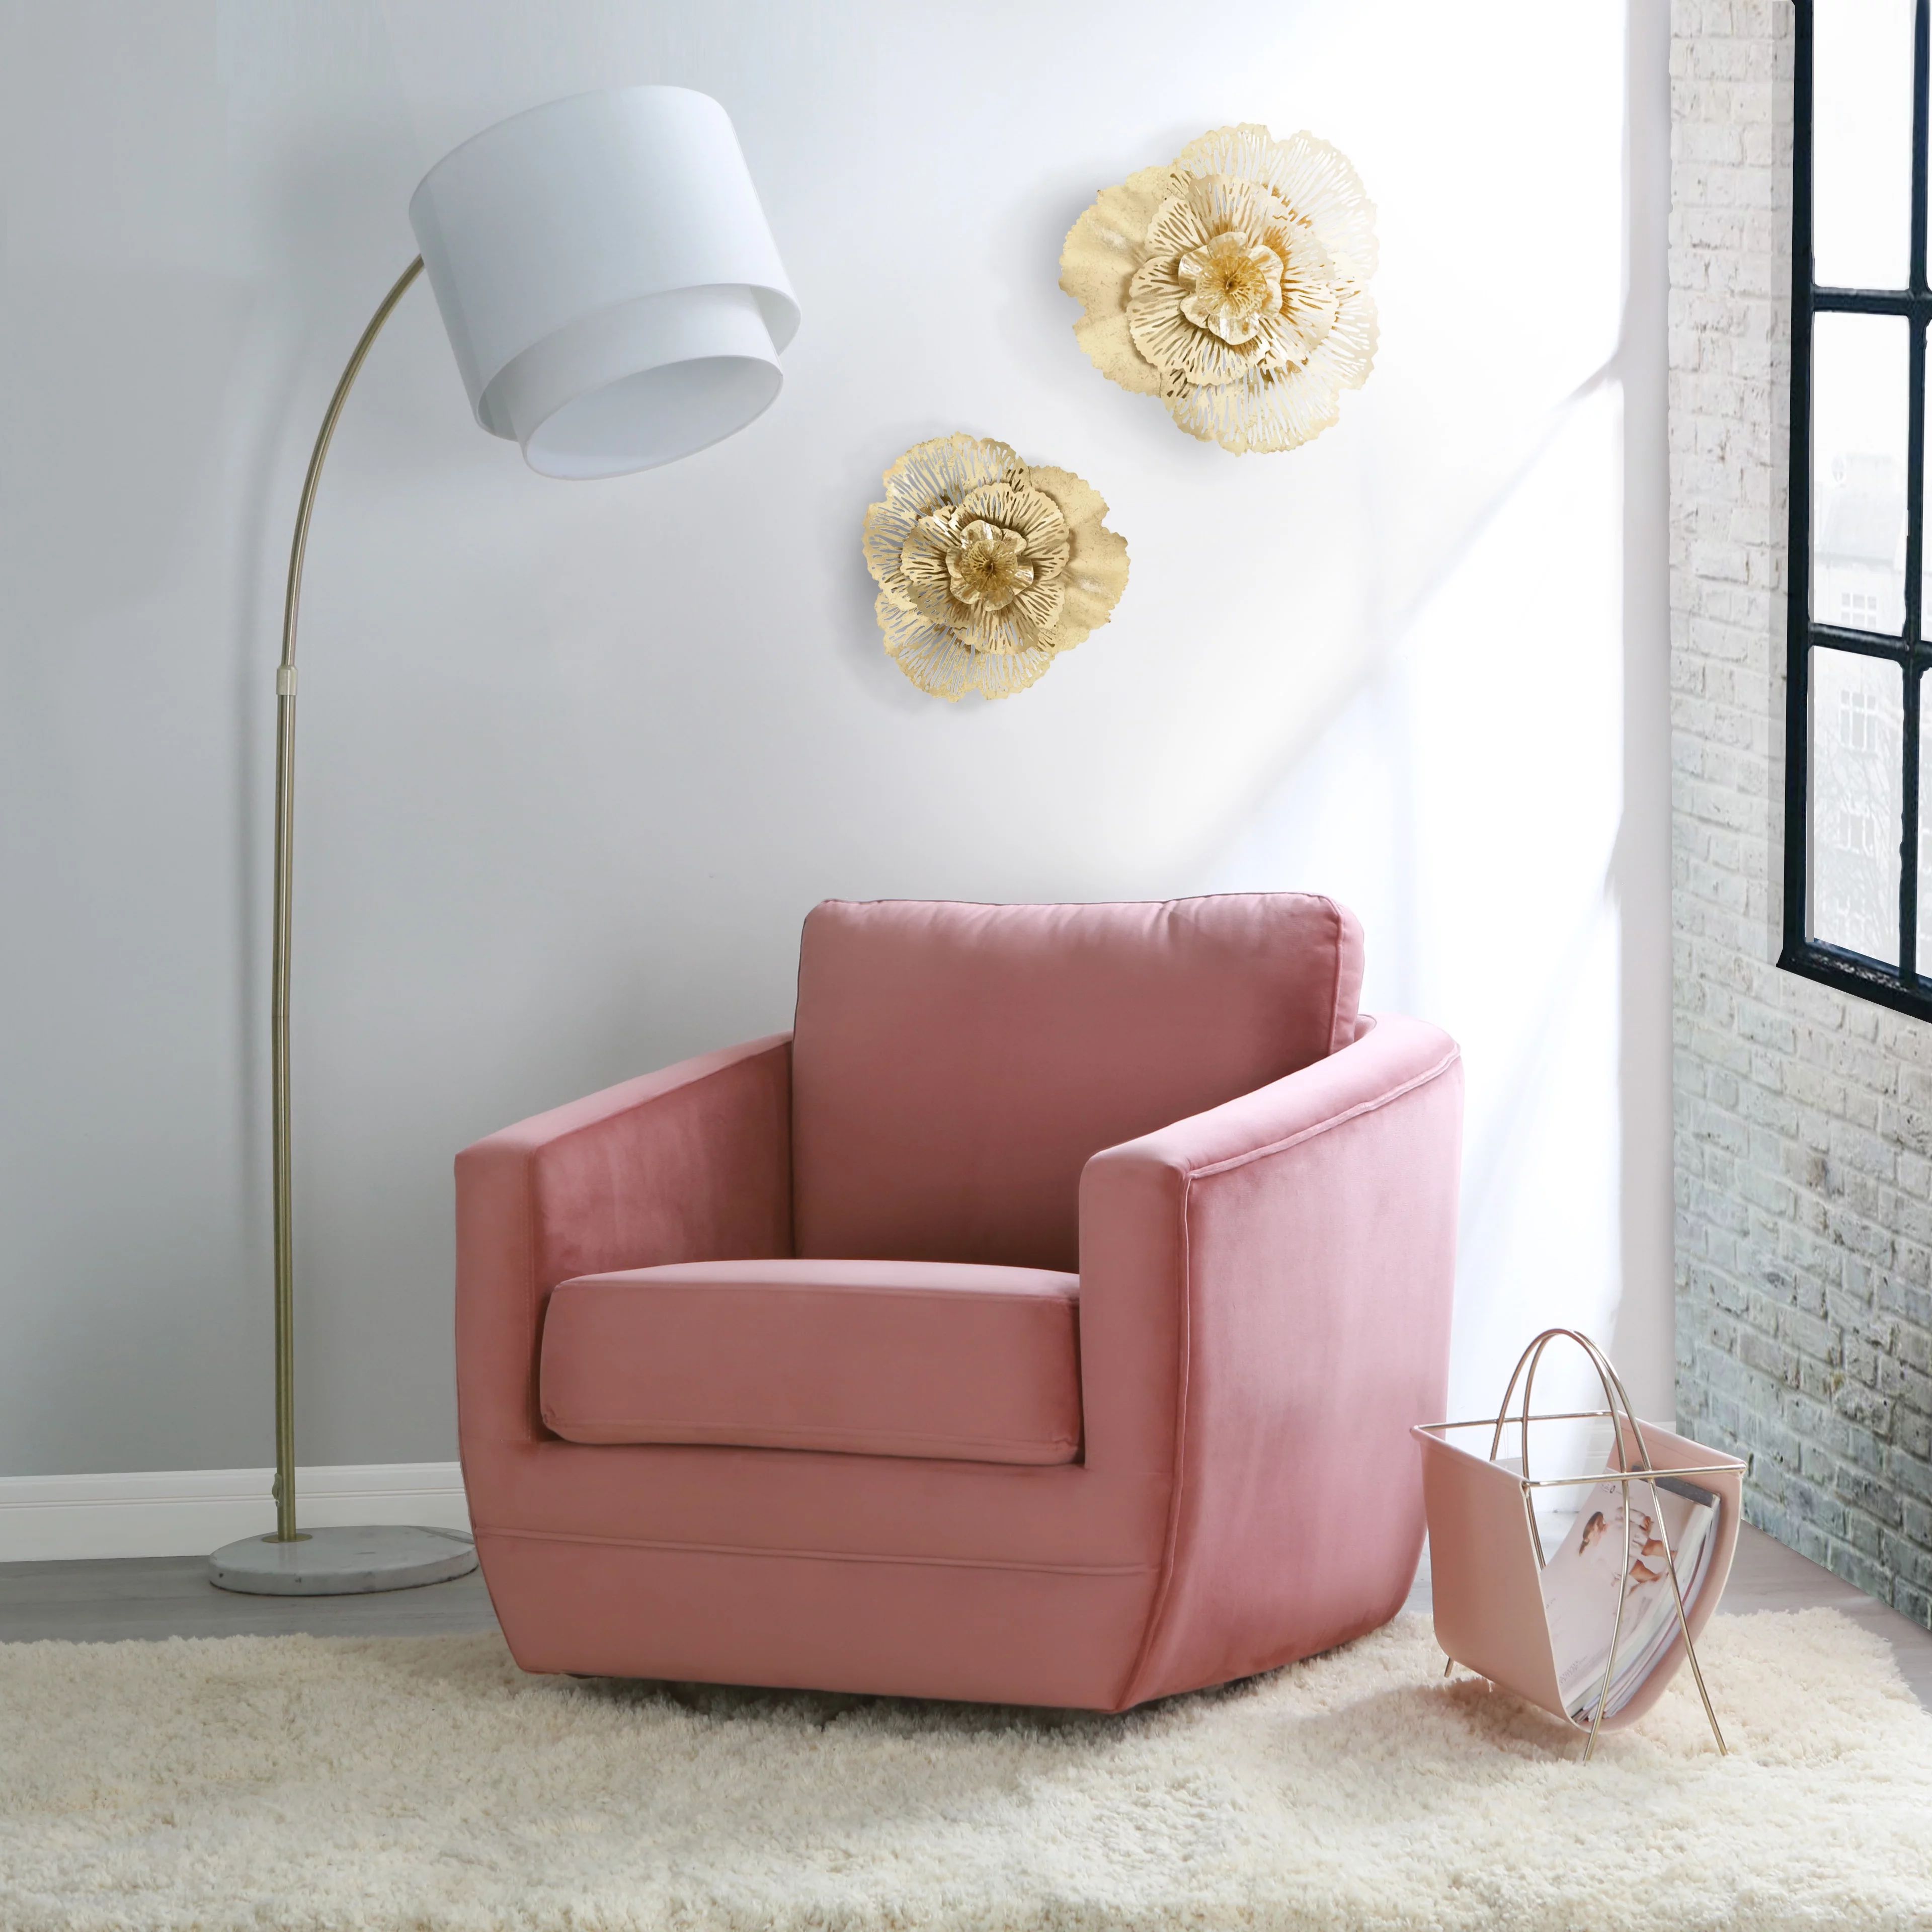 Second Story Home Gogh Upholstered Swivel Glider- Pink Dusty Rose | Walmart (US)